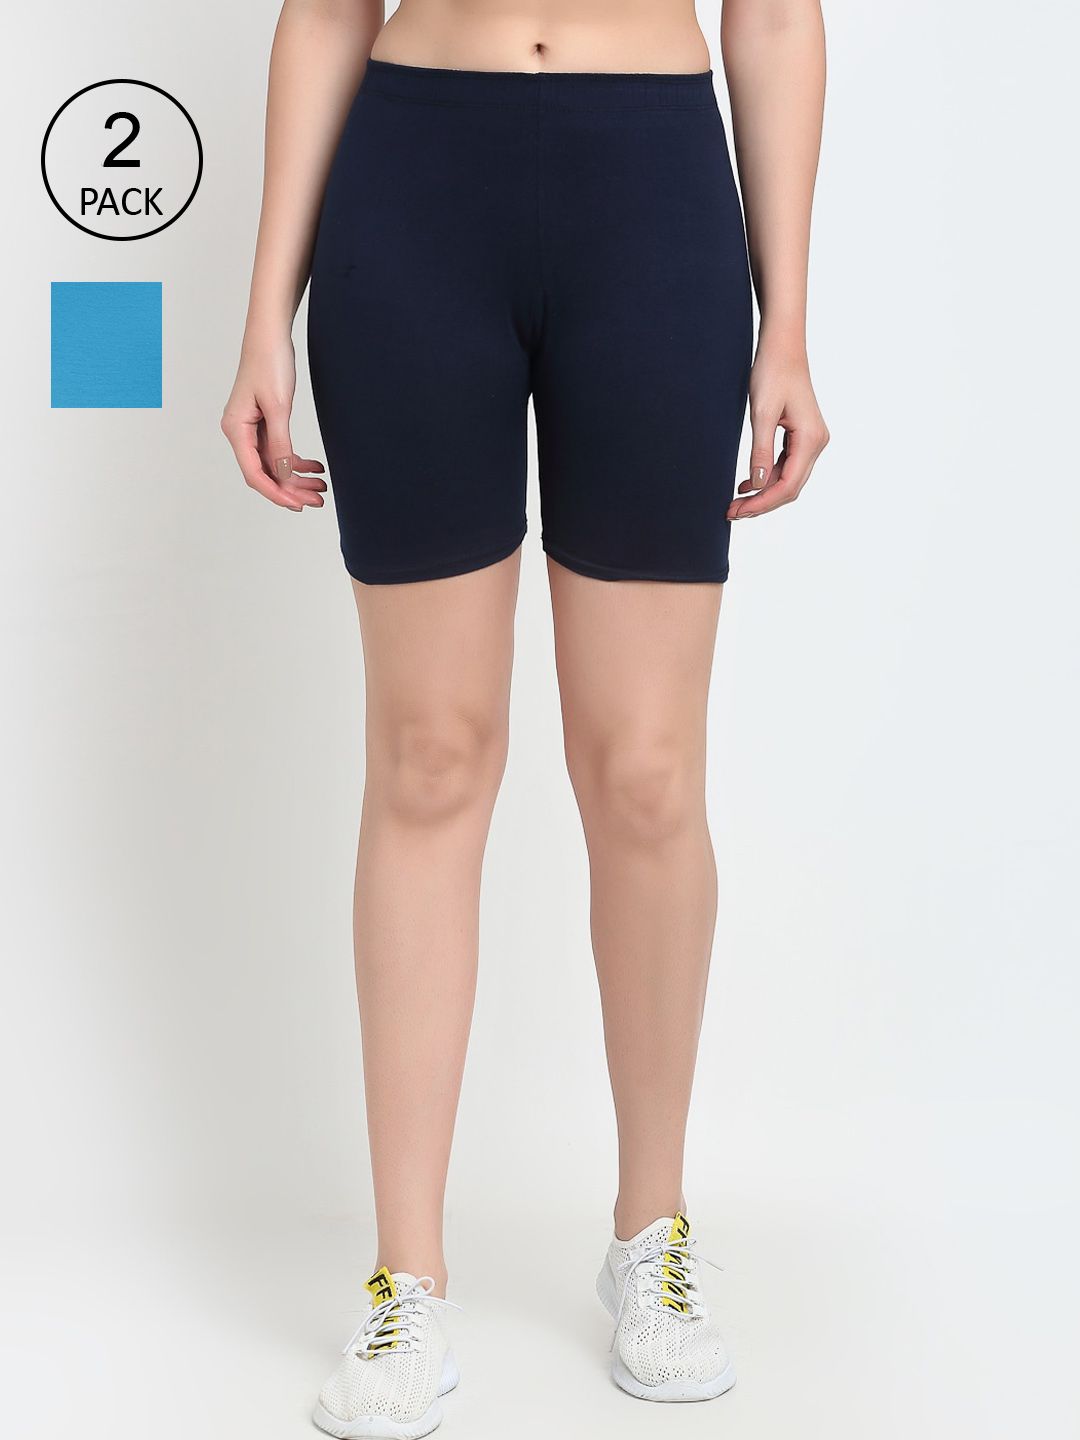 GRACIT Women Navy Blue Cycling Sports Shorts Price in India